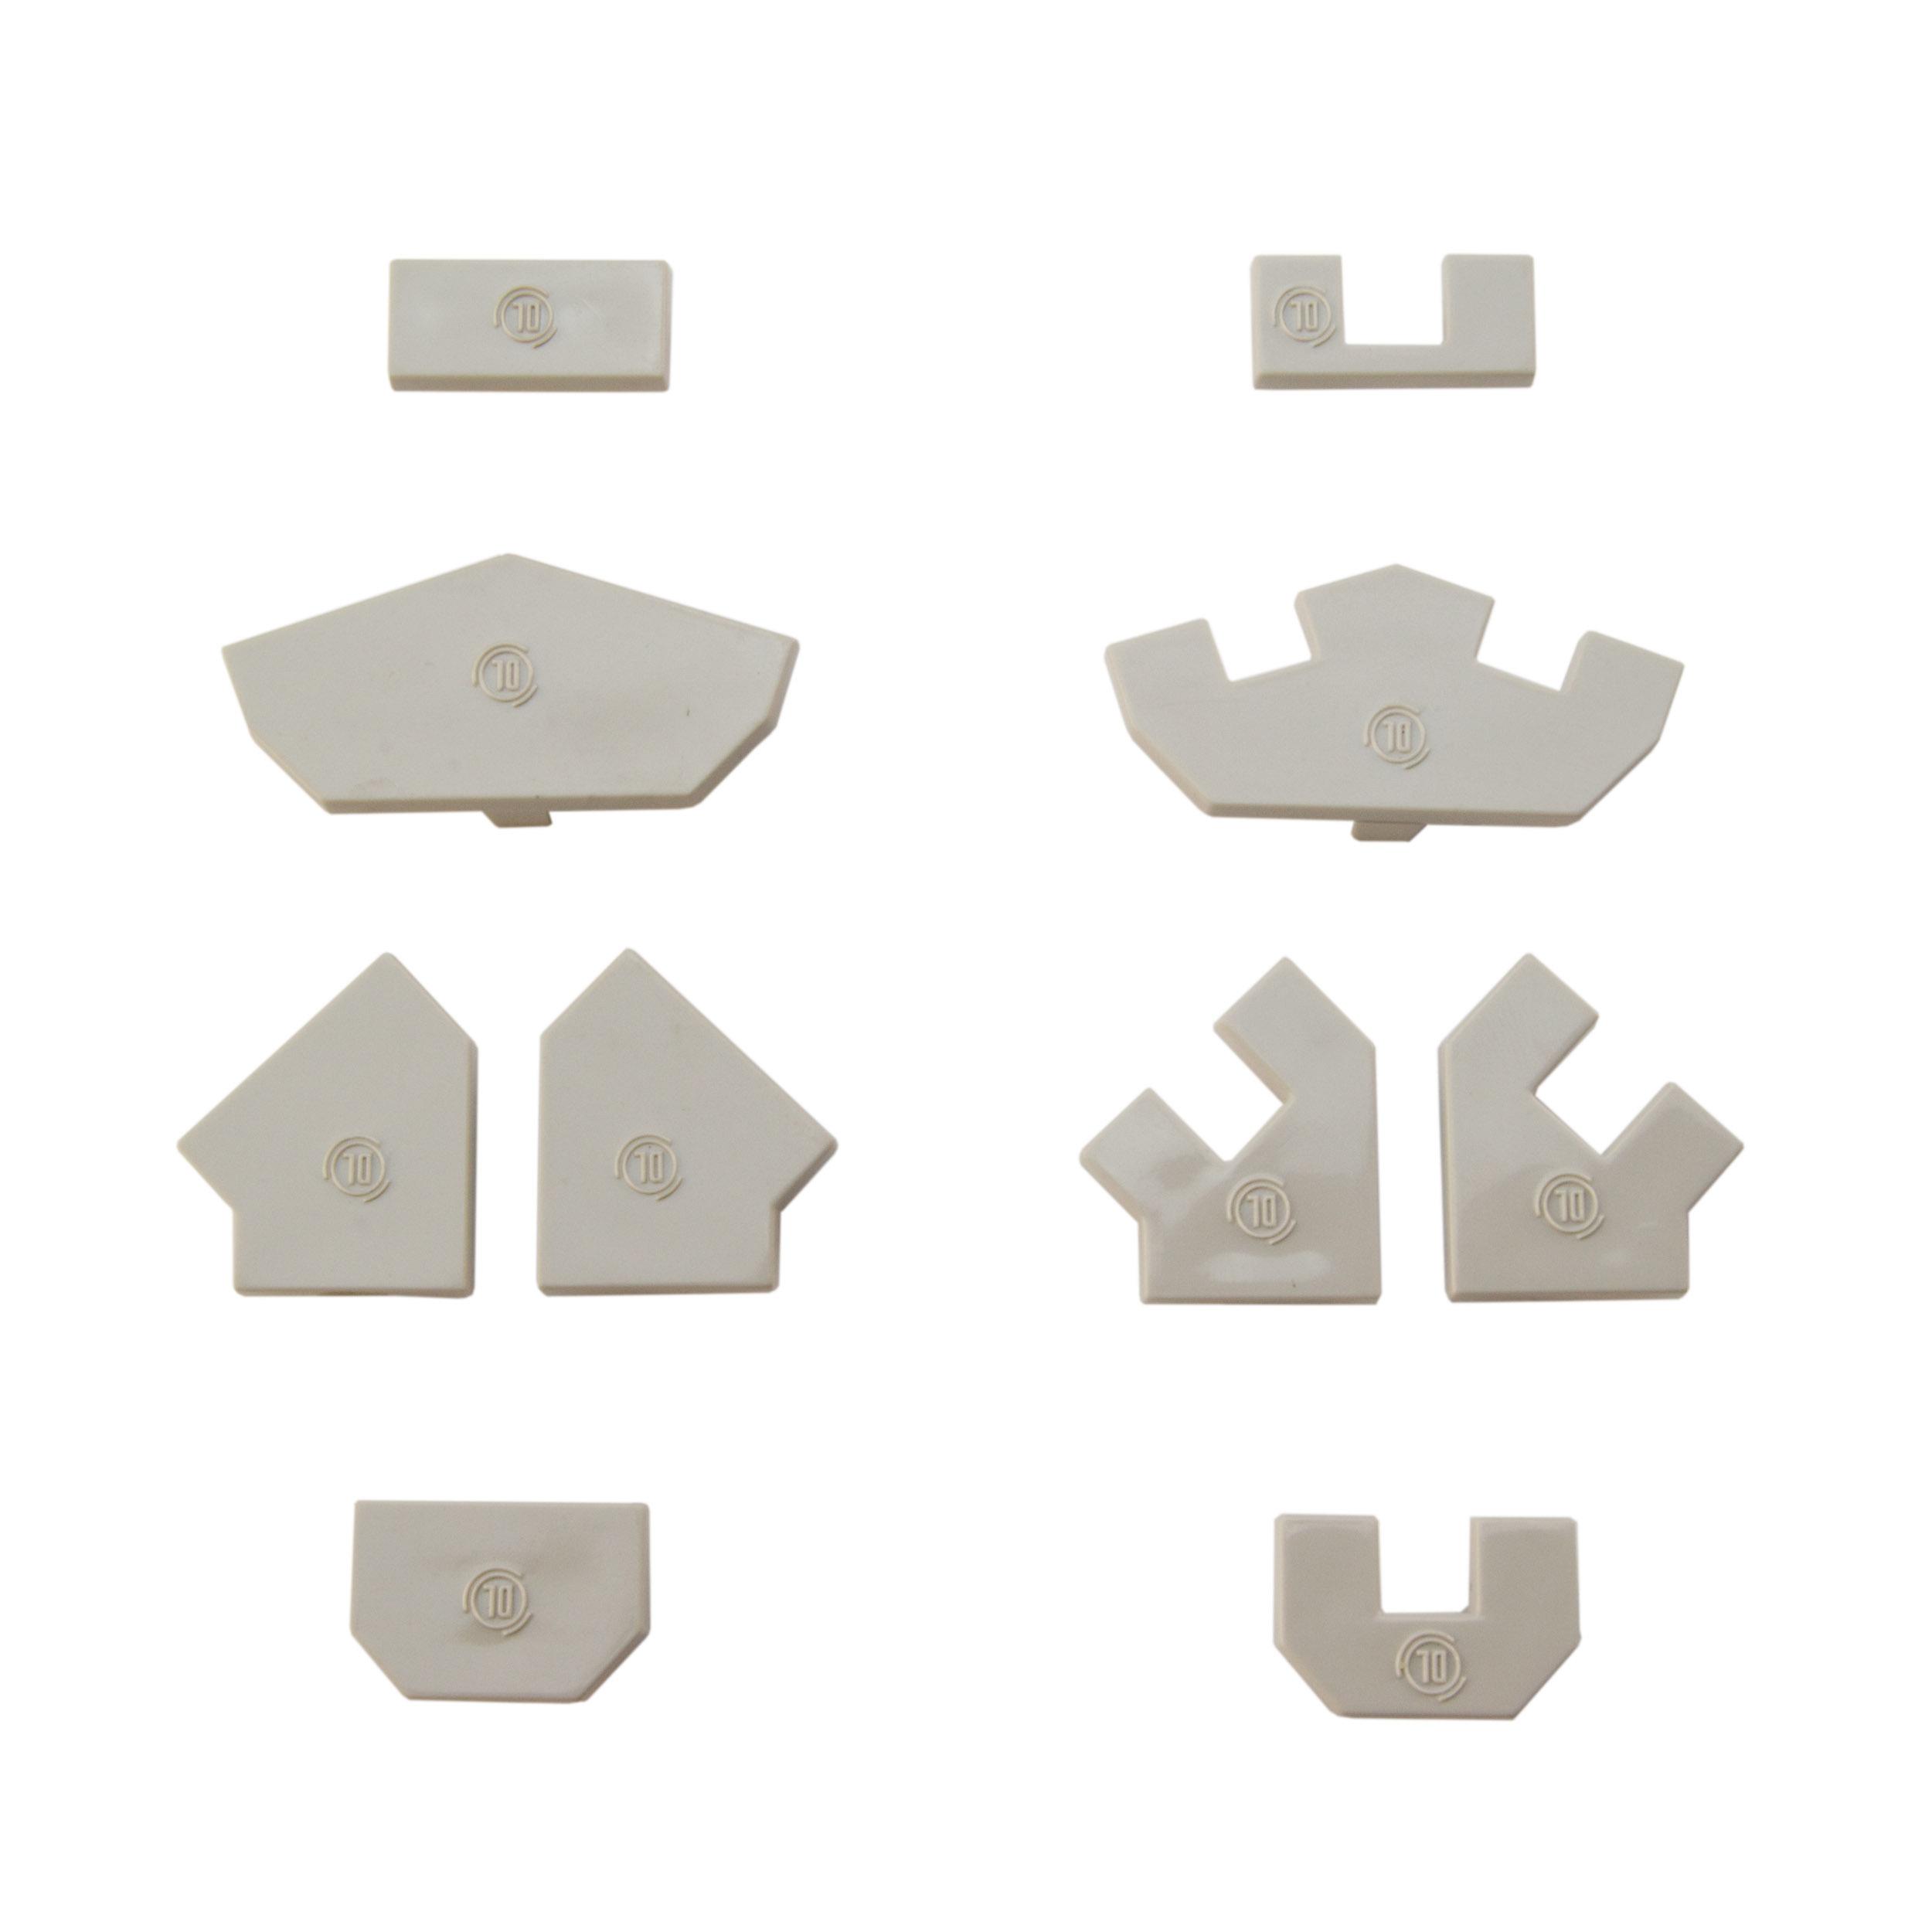 CHROMAPATH  SLIM End-cap  3
pack. Includes 3 Closed
End-Caps and 3 Open
End-CapsN/AGrayN/A